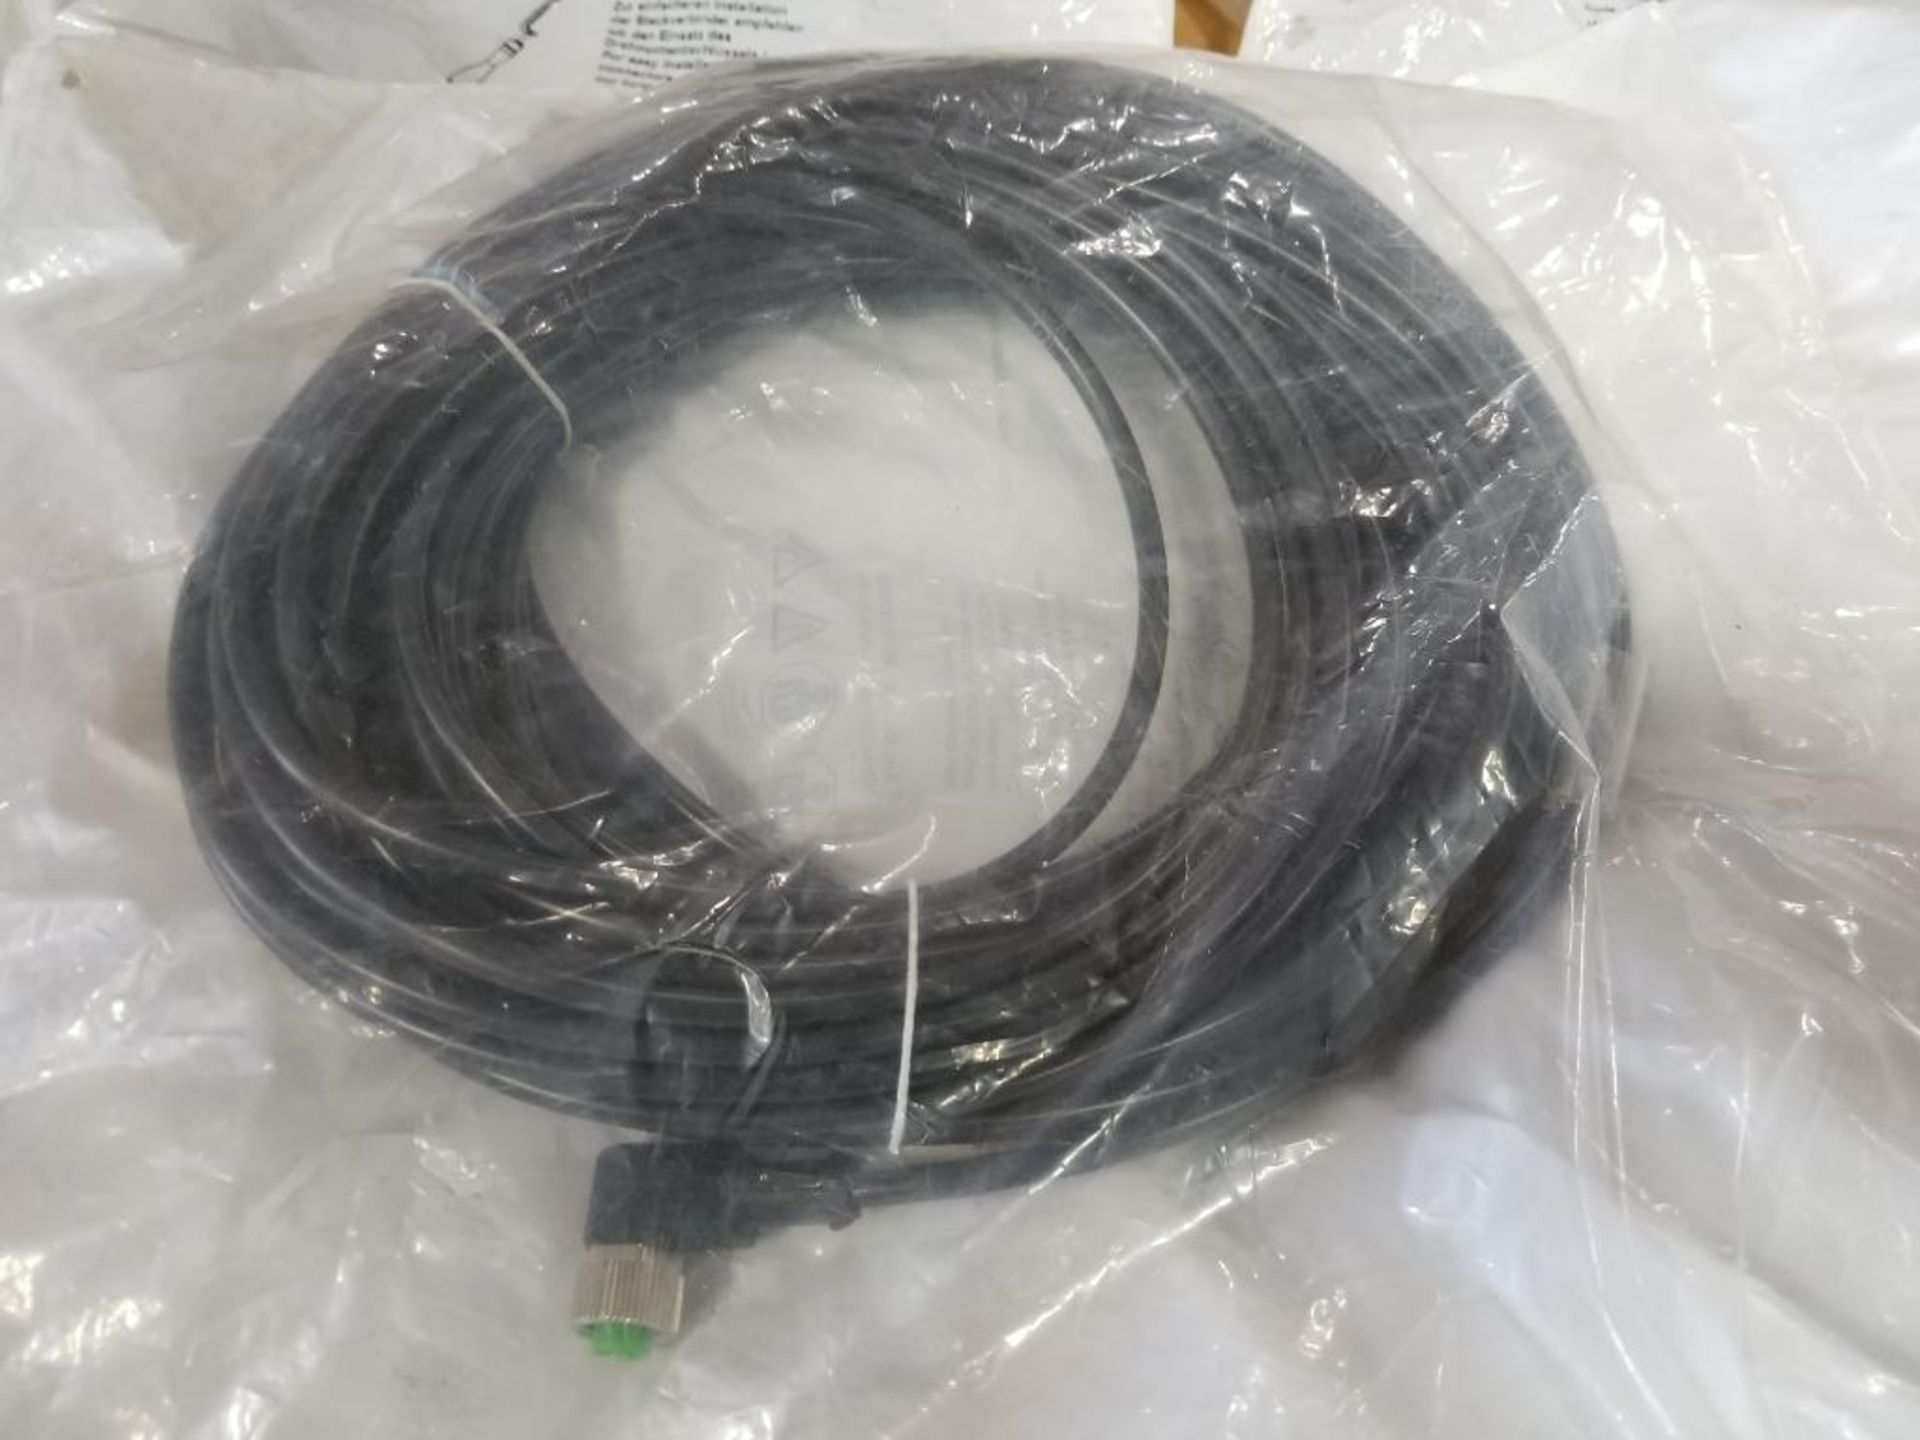 Qty 4 - Murr Elektronik assorted interconnect cables. New in package. - Image 6 of 6